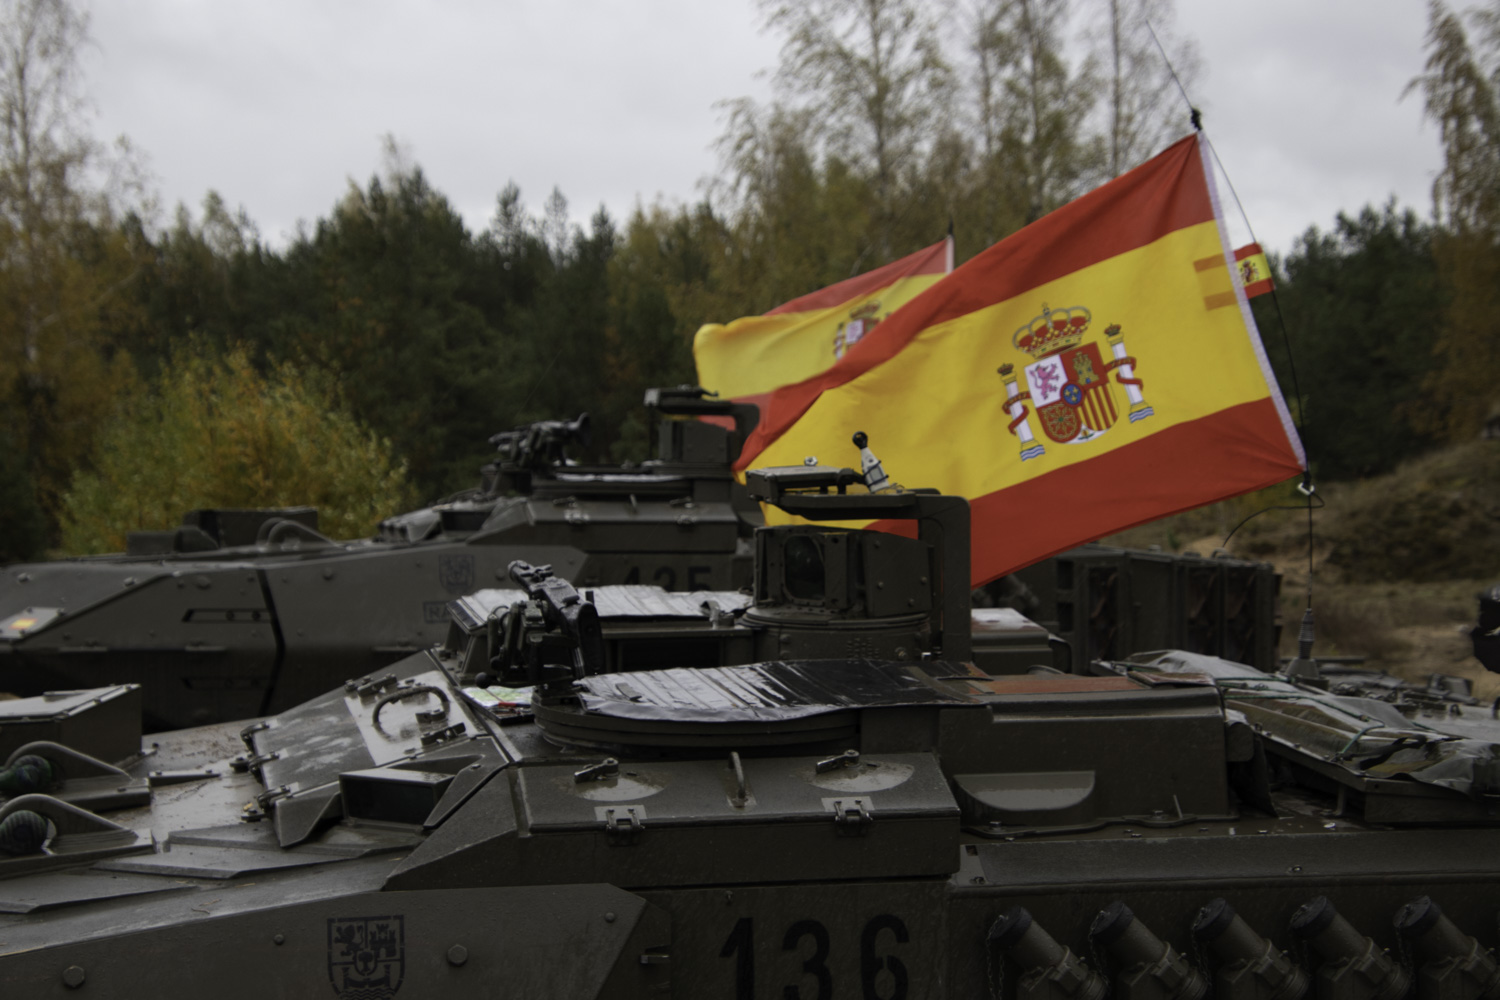 Spanish Leopards compete against the rest of eFP tanks in the “Iron Spear” exercise